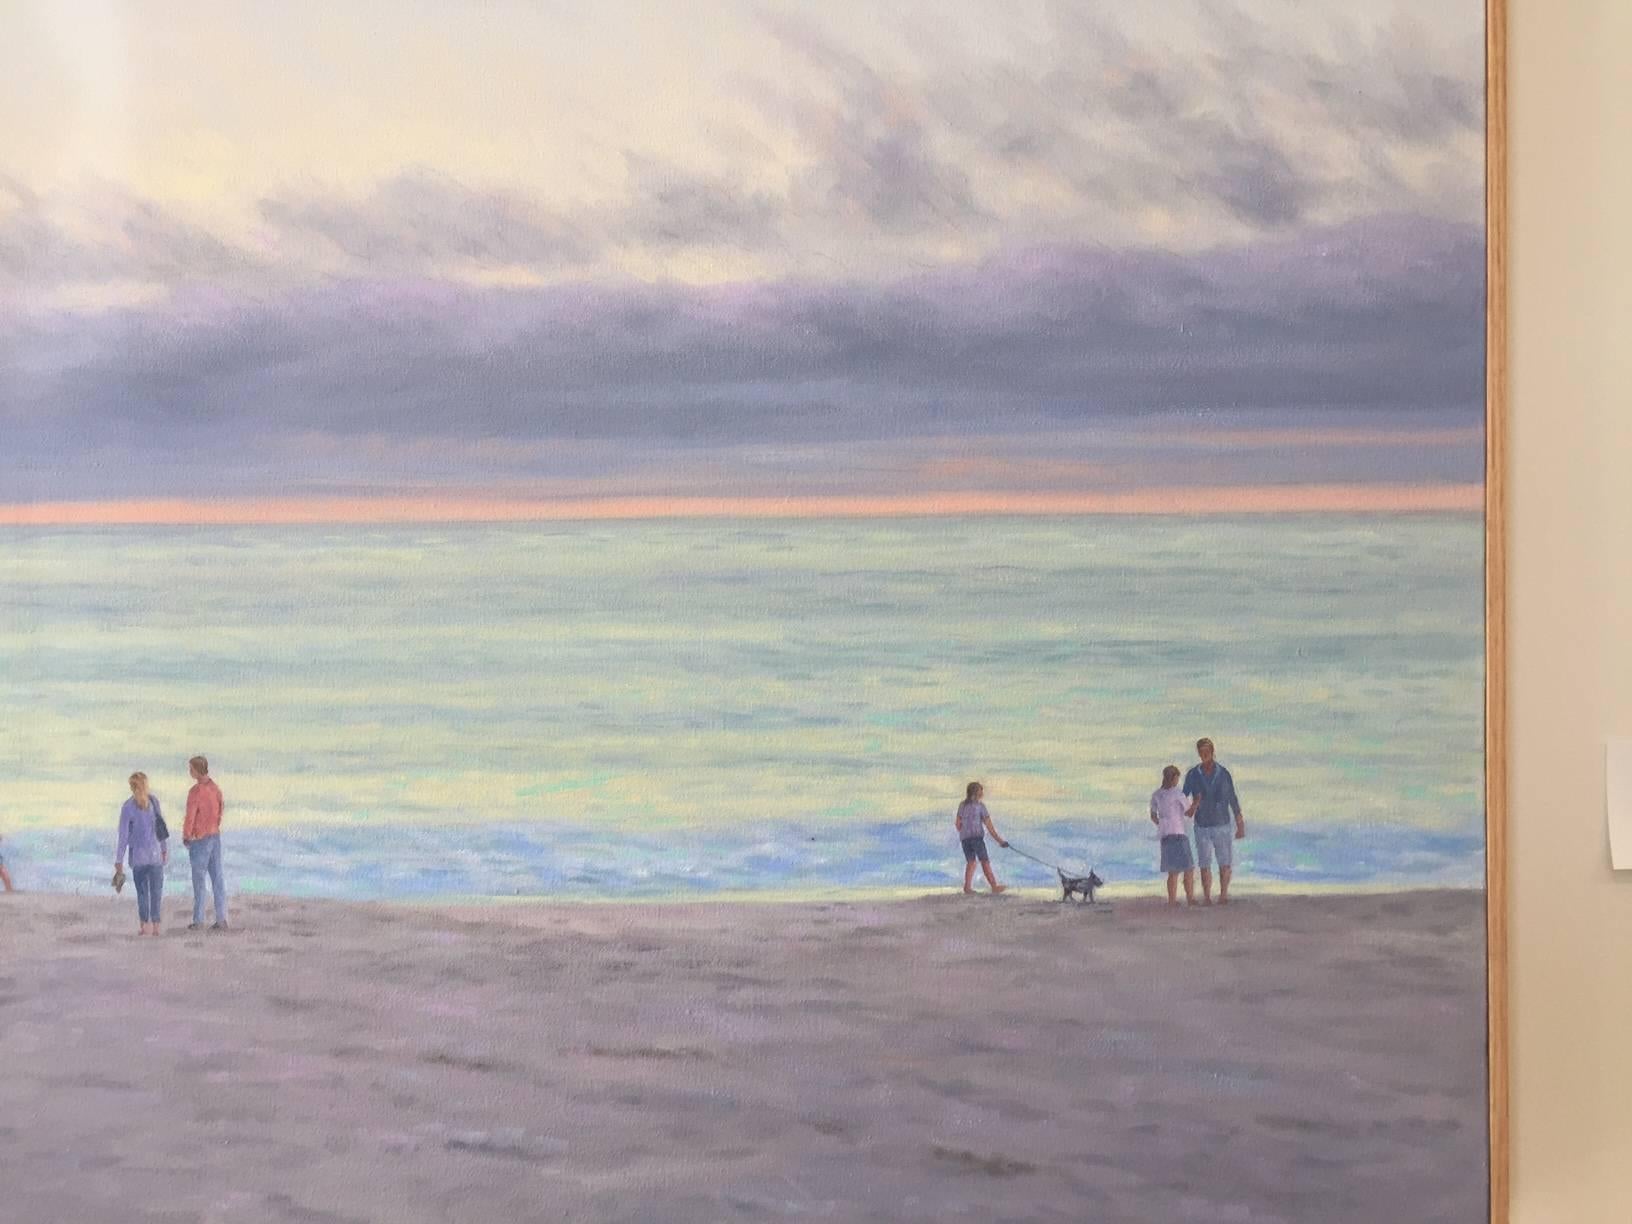 A tranquil oil painting featuring an early evening sunset with people strolling on a beach in front of a majestic sky from Willard Dixon, who is one of the finest American contemporary realist painters today. Dixon has painted coastal landscapes for